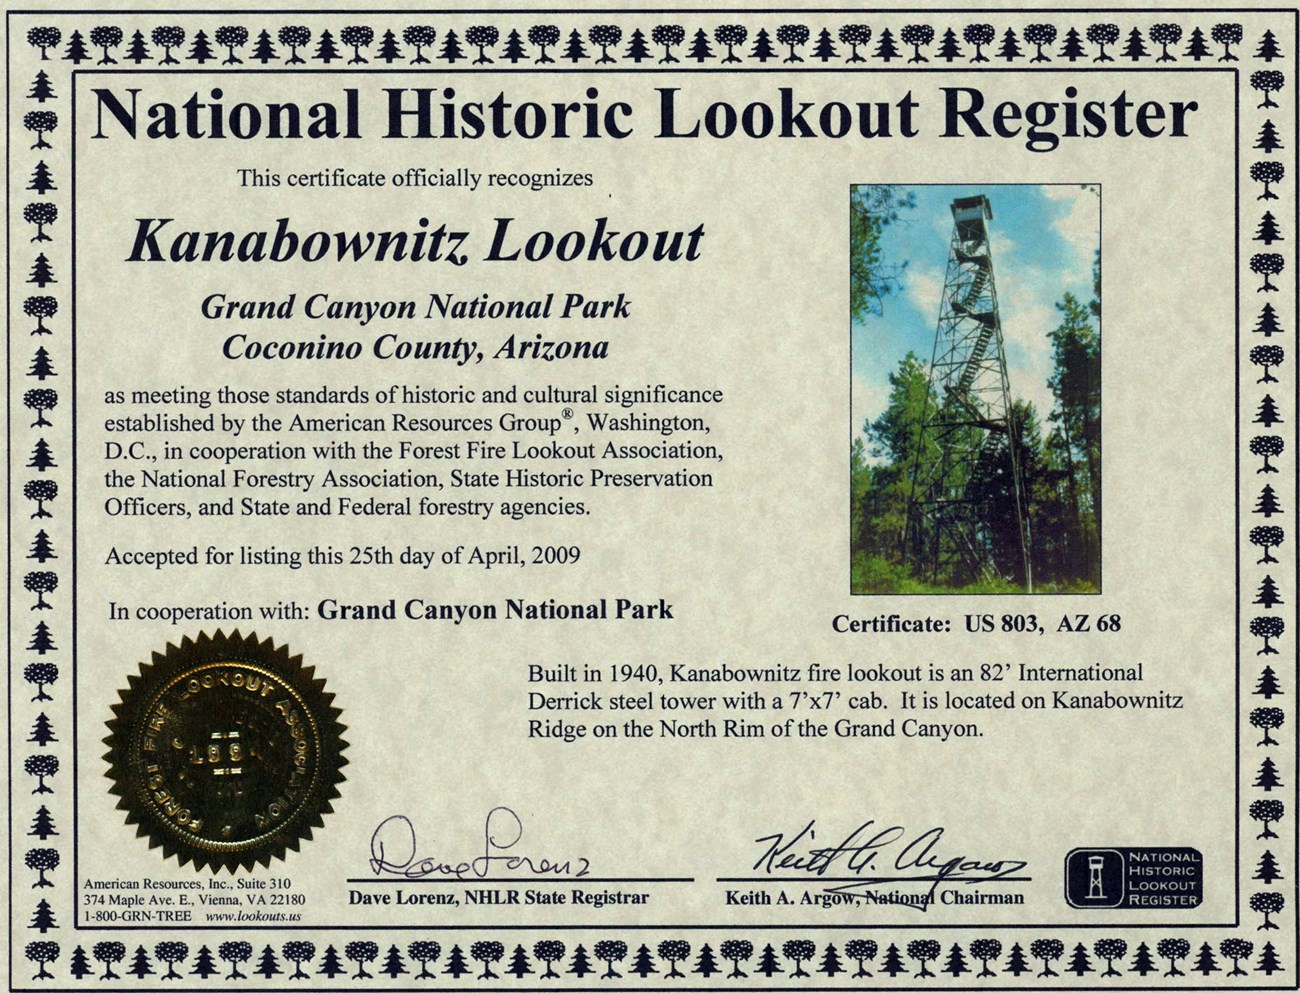 Certificate recognizing Kanabownitz fire tower as culturally significant. There is a photo of the tower, a gold seal, and validation signatures. April 25, 2009